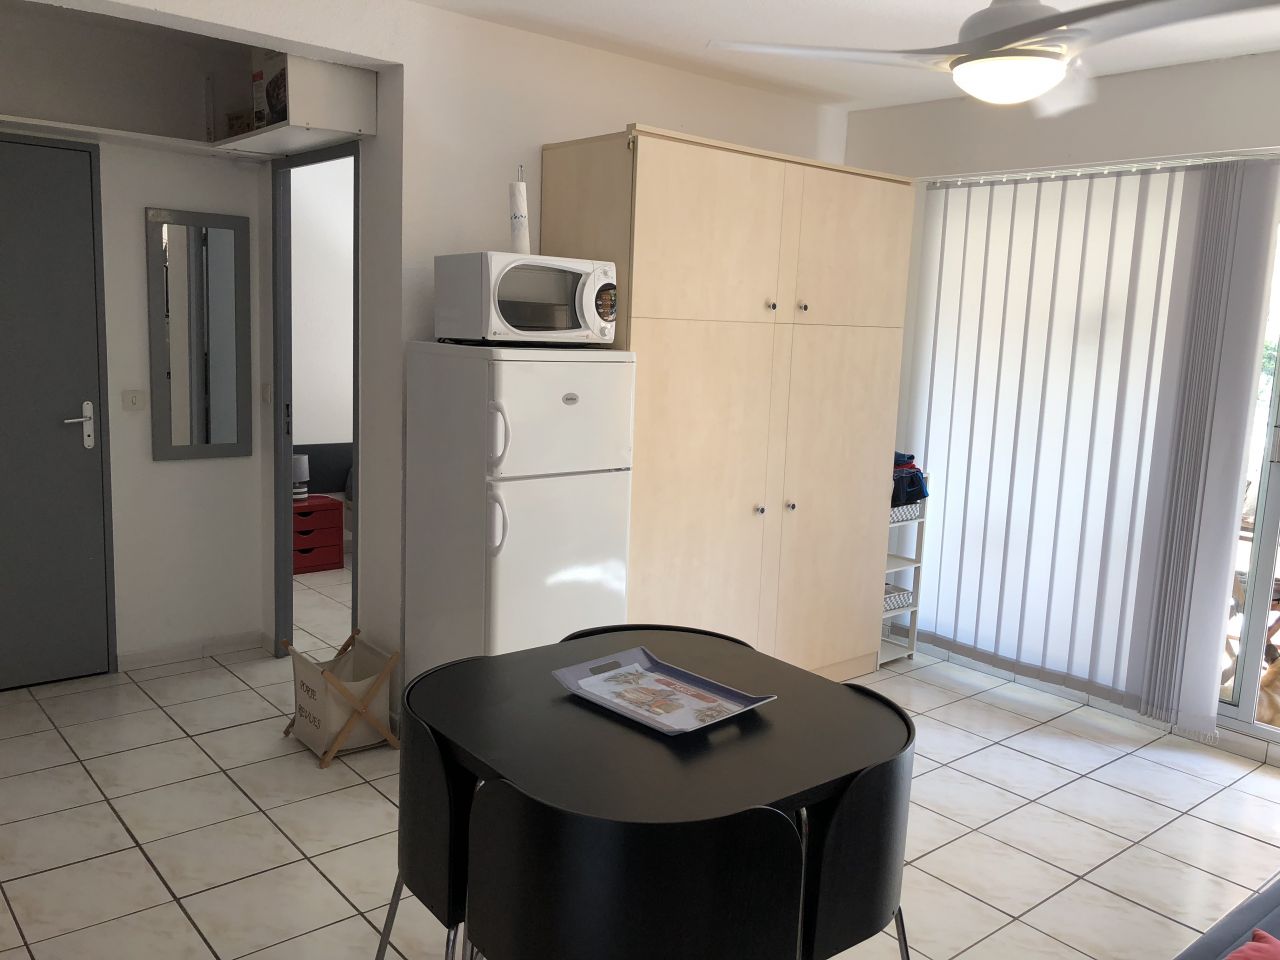 Location appartement Le Baracrs N°2647 image 3